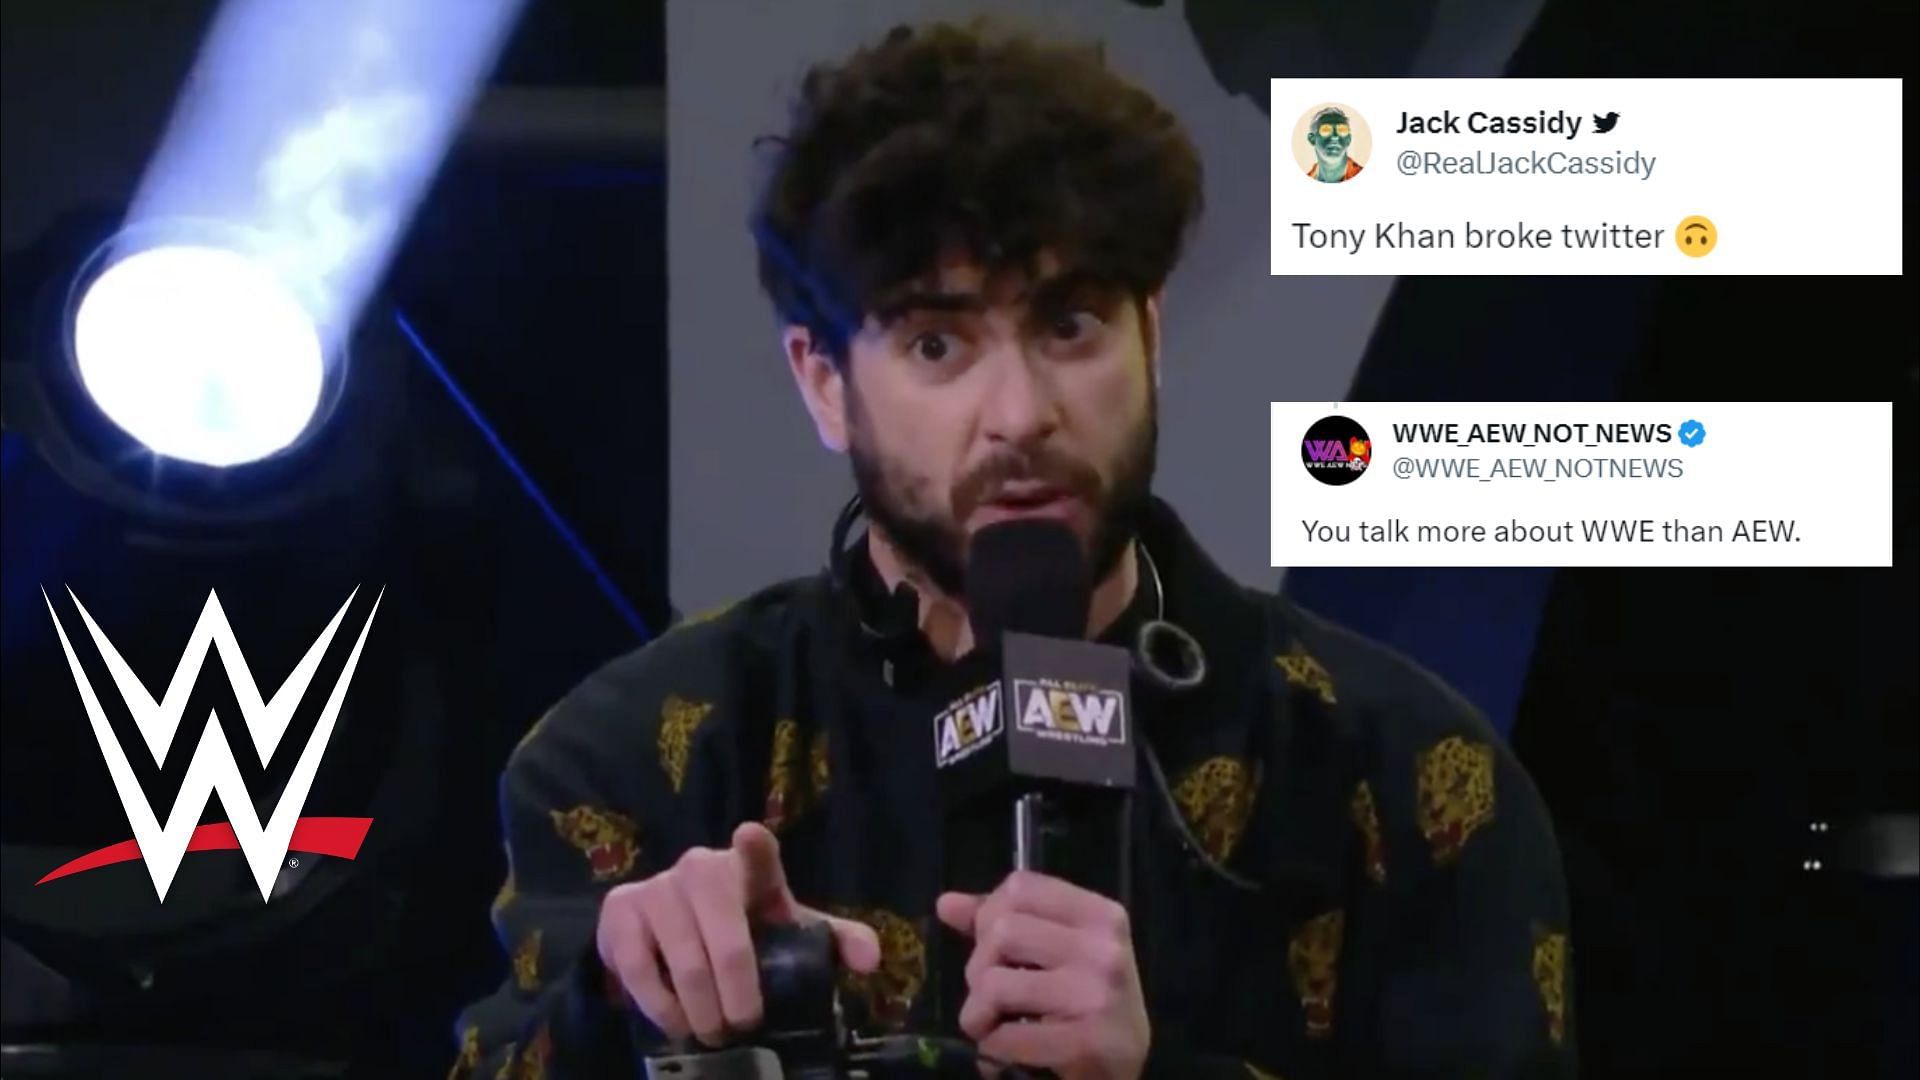 Tony Khan has been very active on Twitter recently